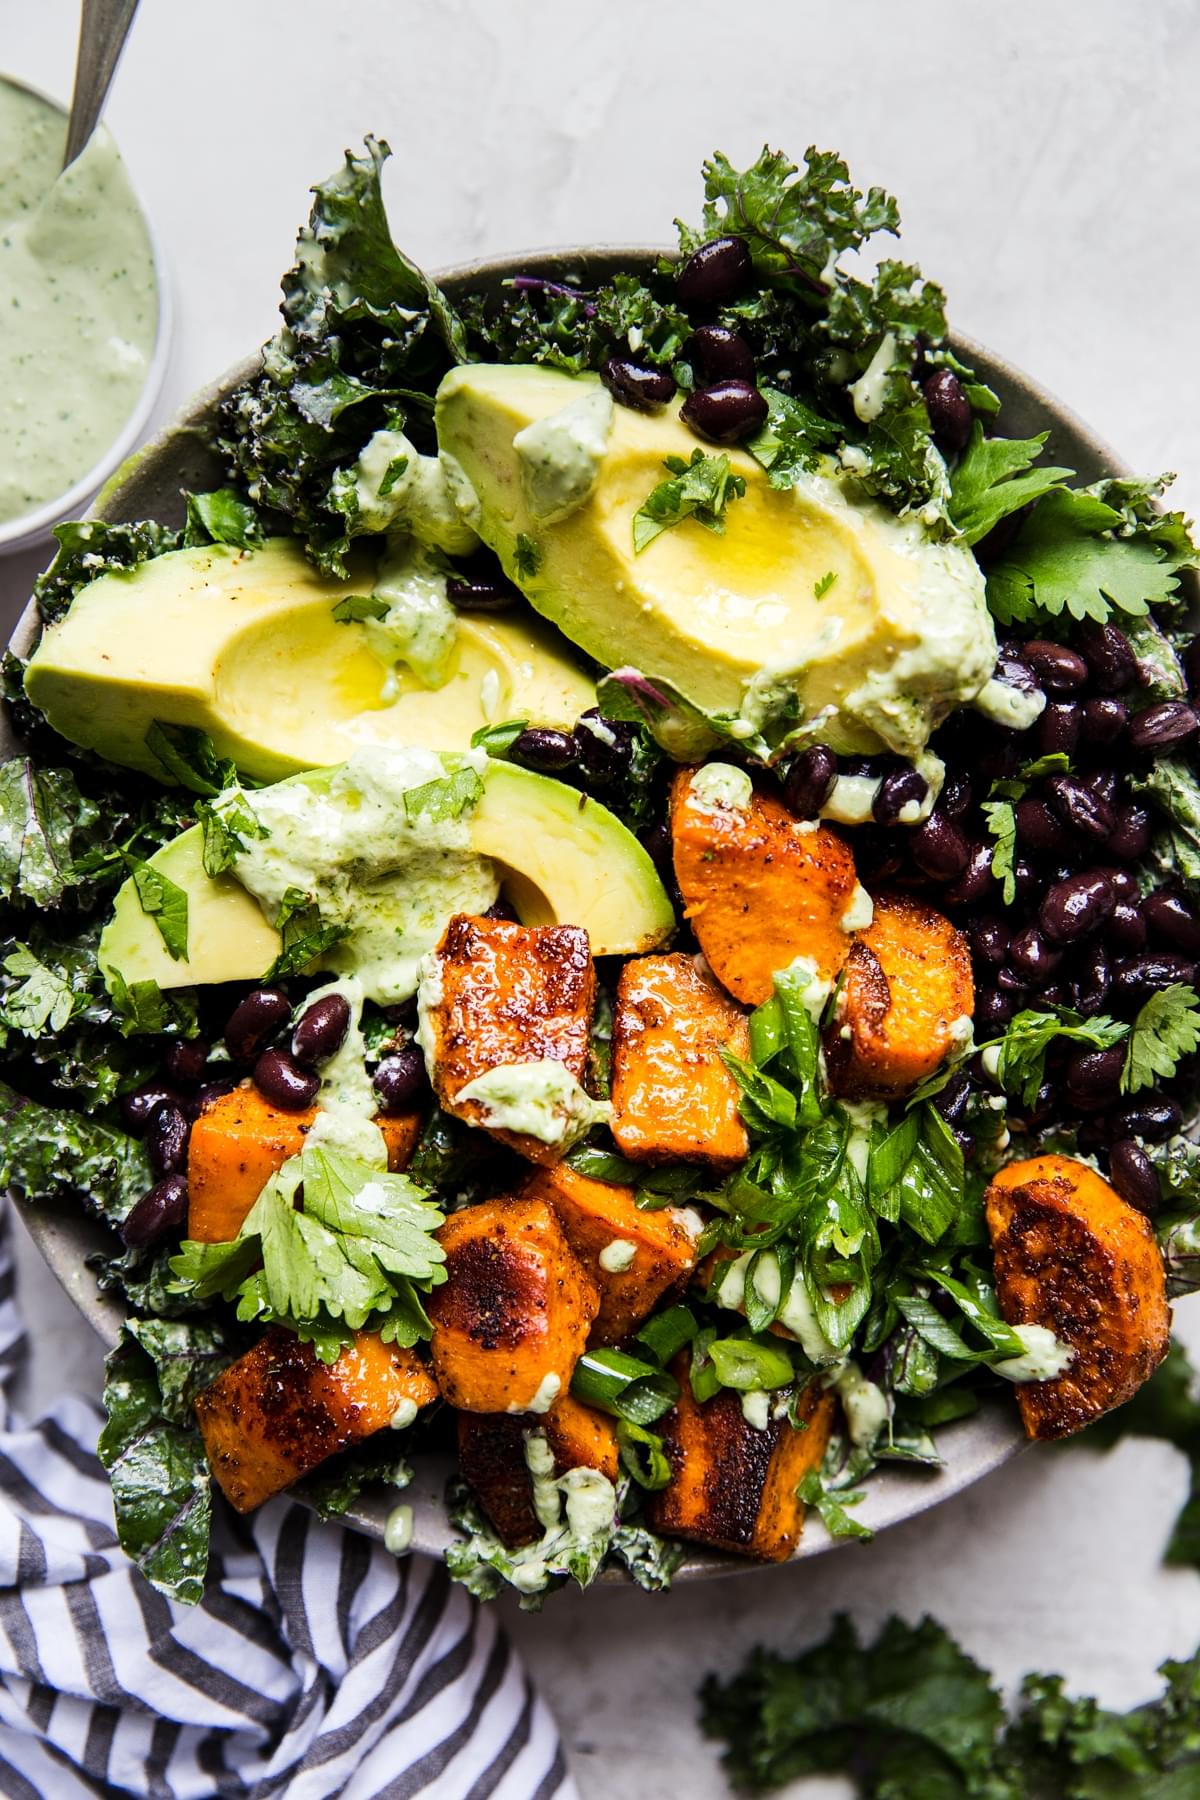 Vegan Roasted Sweet Potato Salad with black beans and avocado on a bed of kale